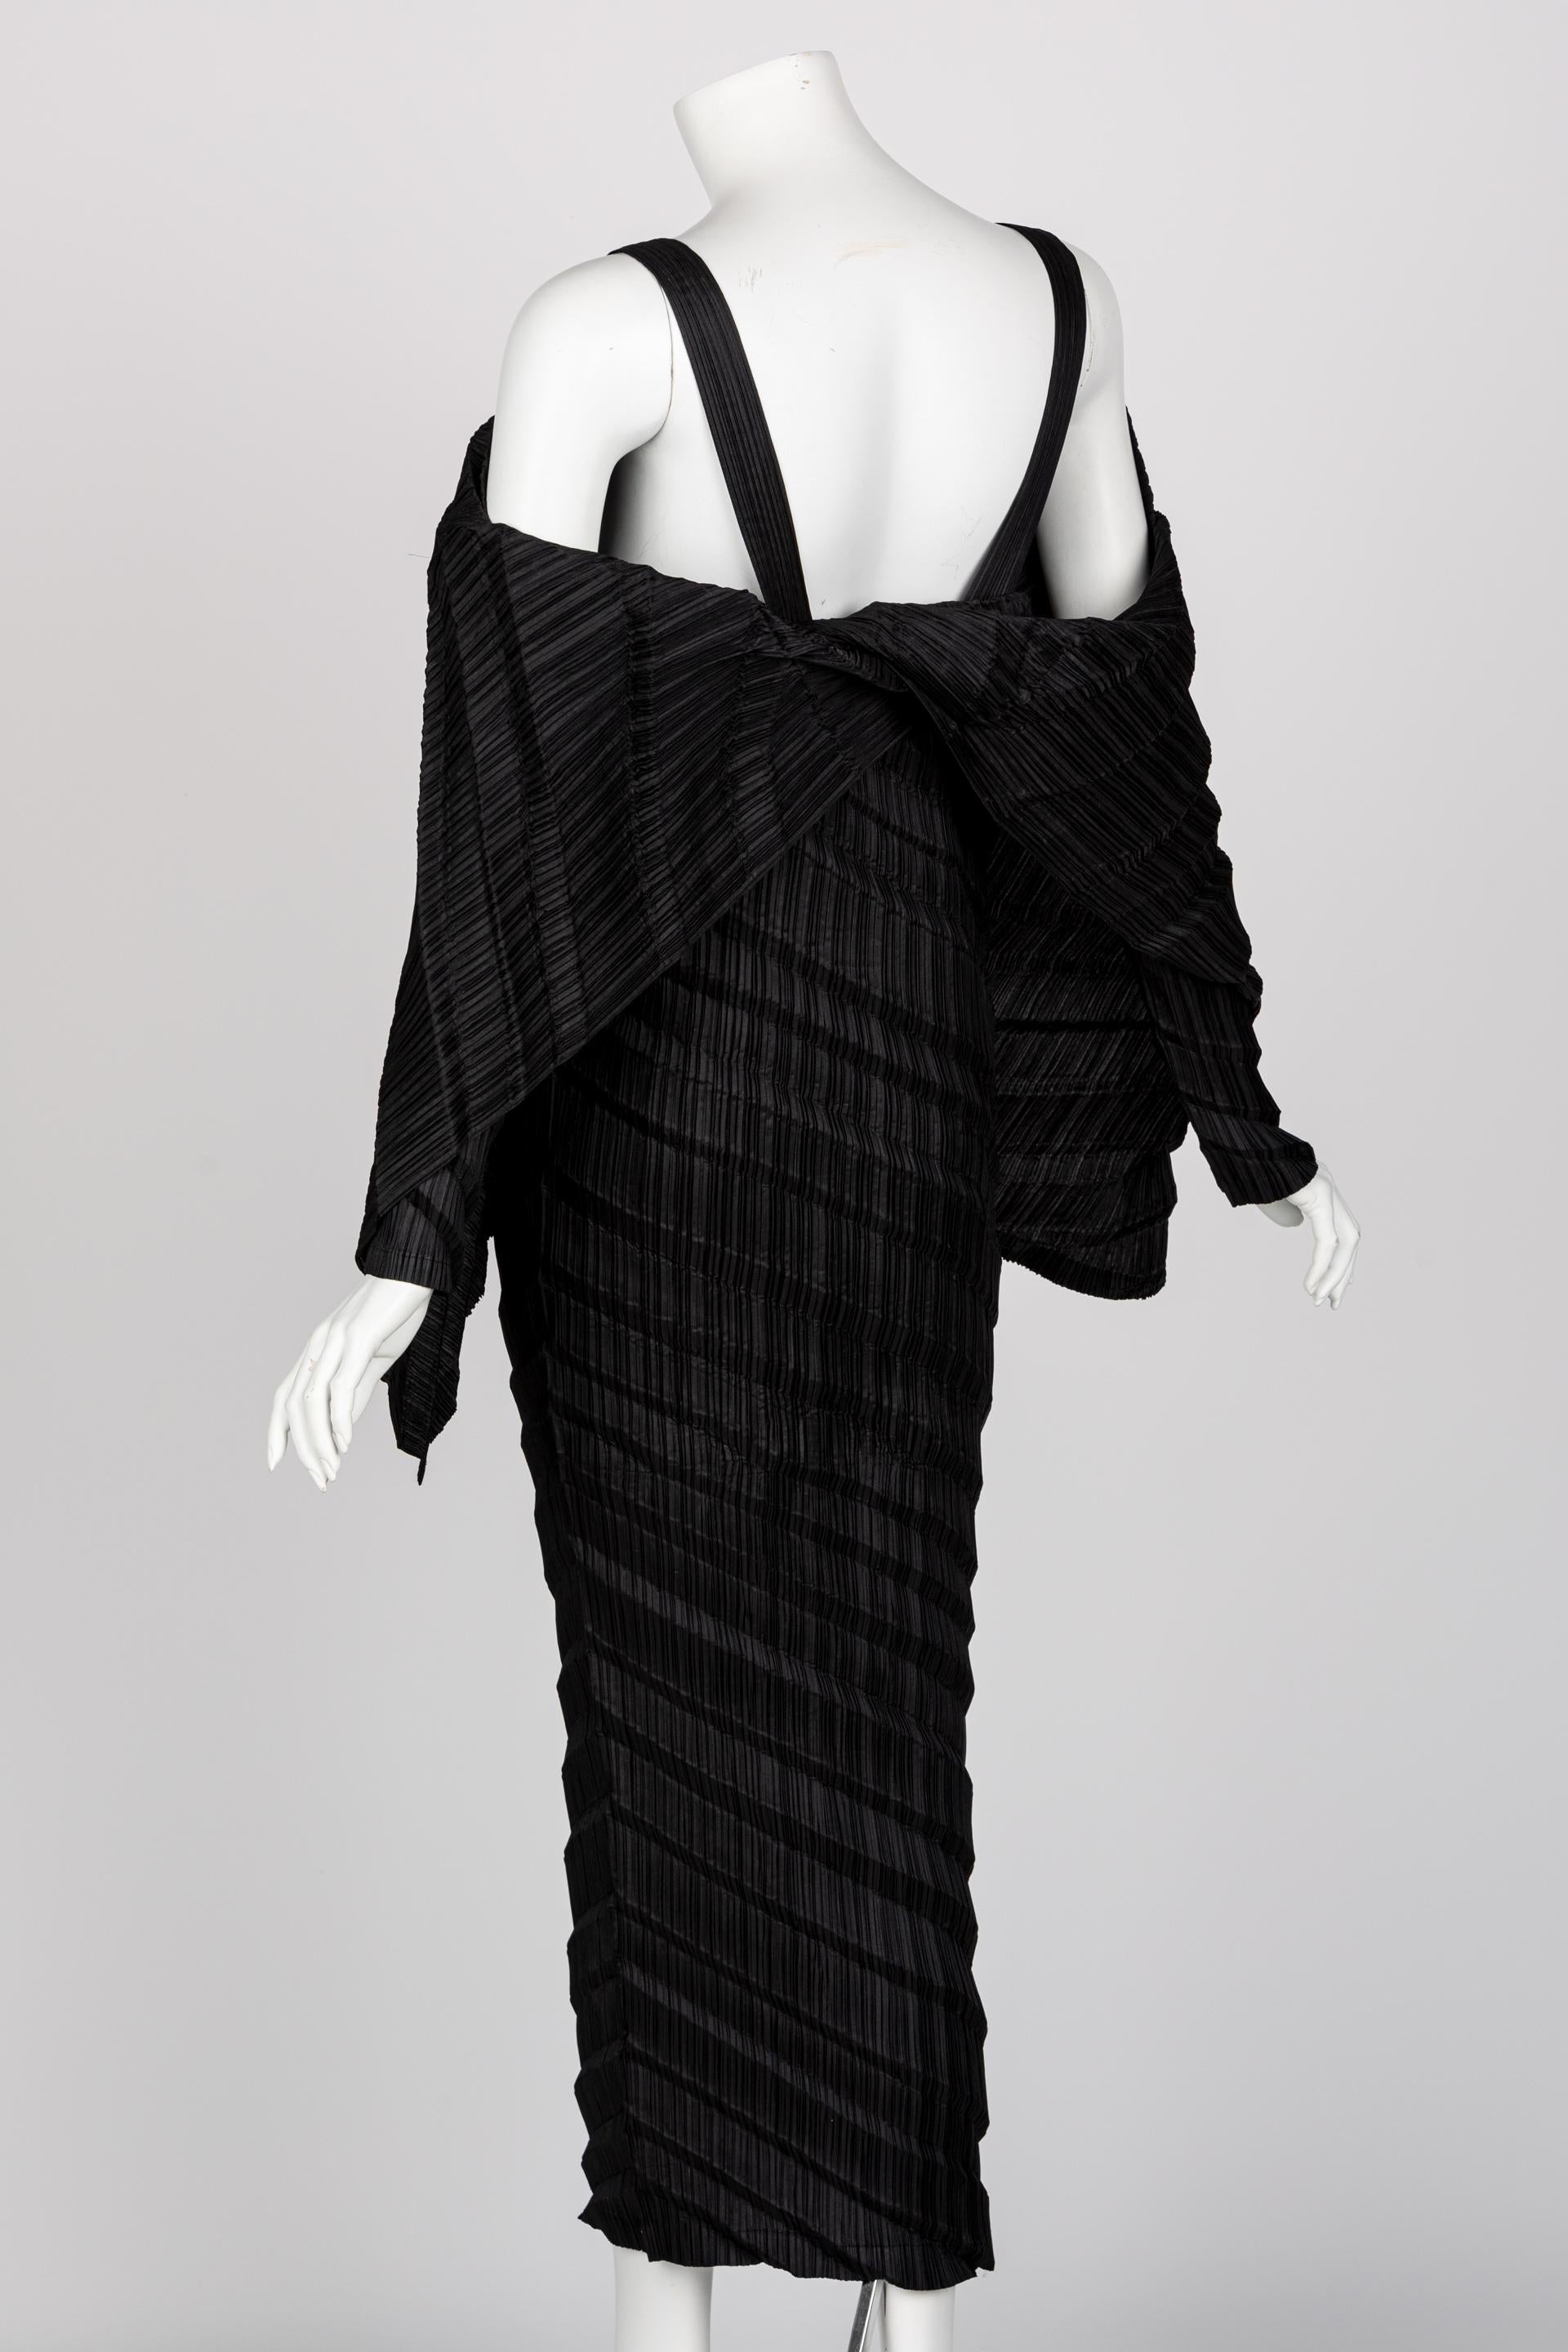 Issey Miyake is synonymous with sculptural and novel designs. In the 1990s, Miyake revolutionized the world of avant-garde design and textiles in the world of high fashion. Featuring thousands of micro-pleats, this versatile dress features narrow